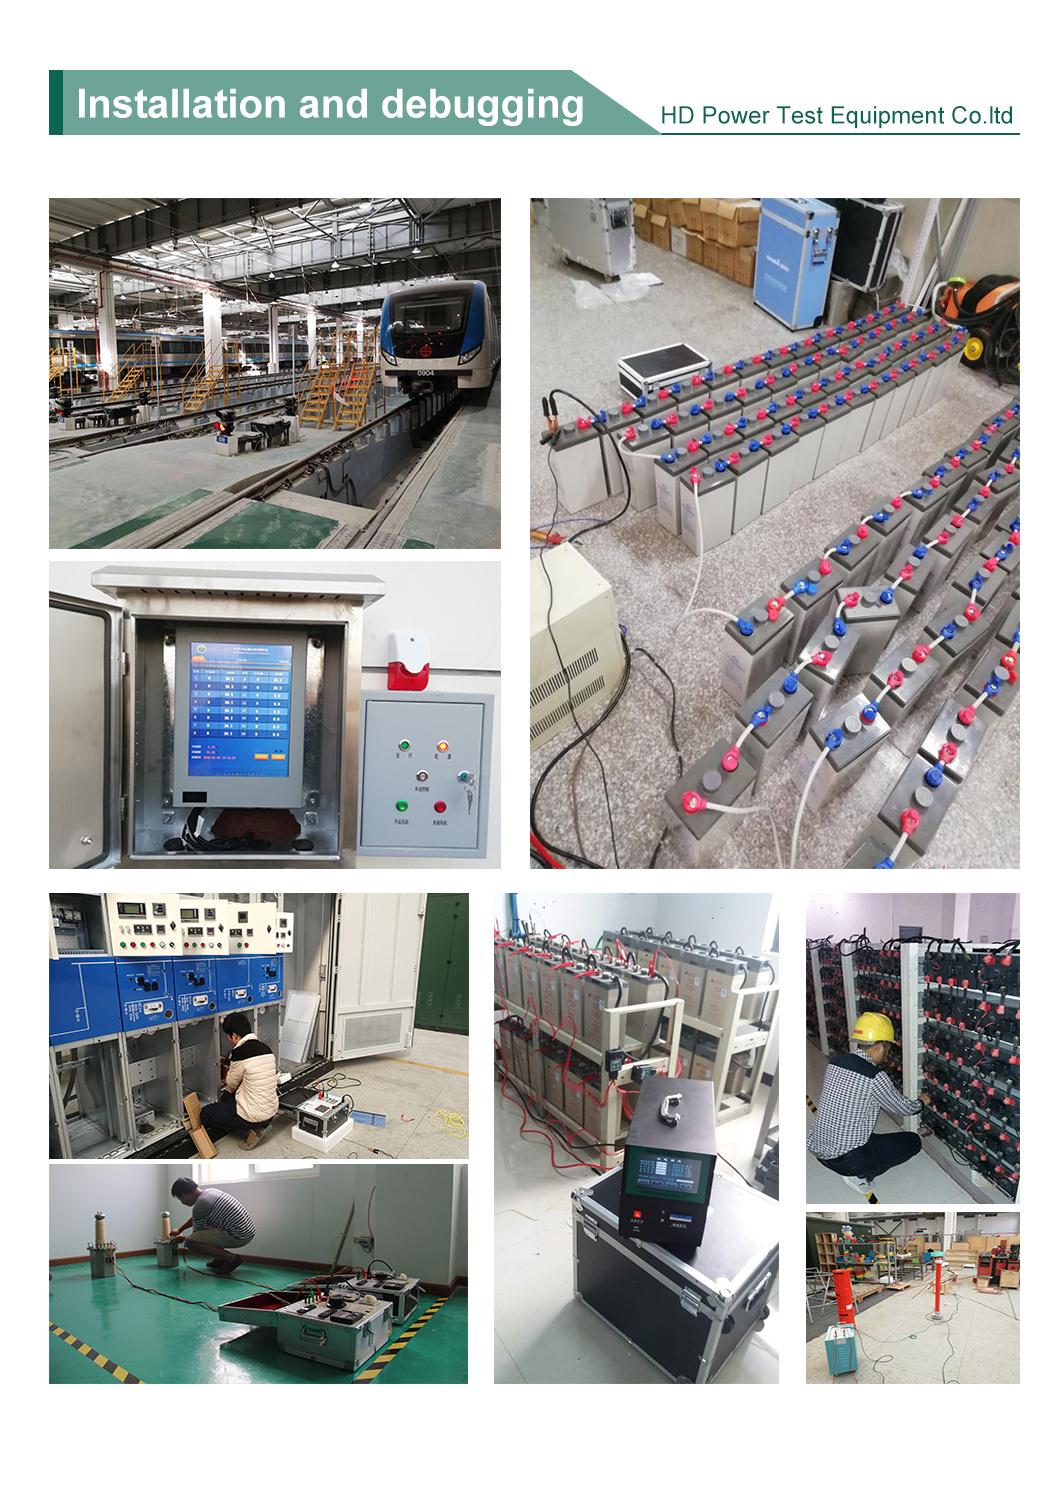 48V 100A Battery Load Tester Battery Discharge Test DC Load Bank for Checking Battery Real Capacity in Power Plant, Data Center and Telecom